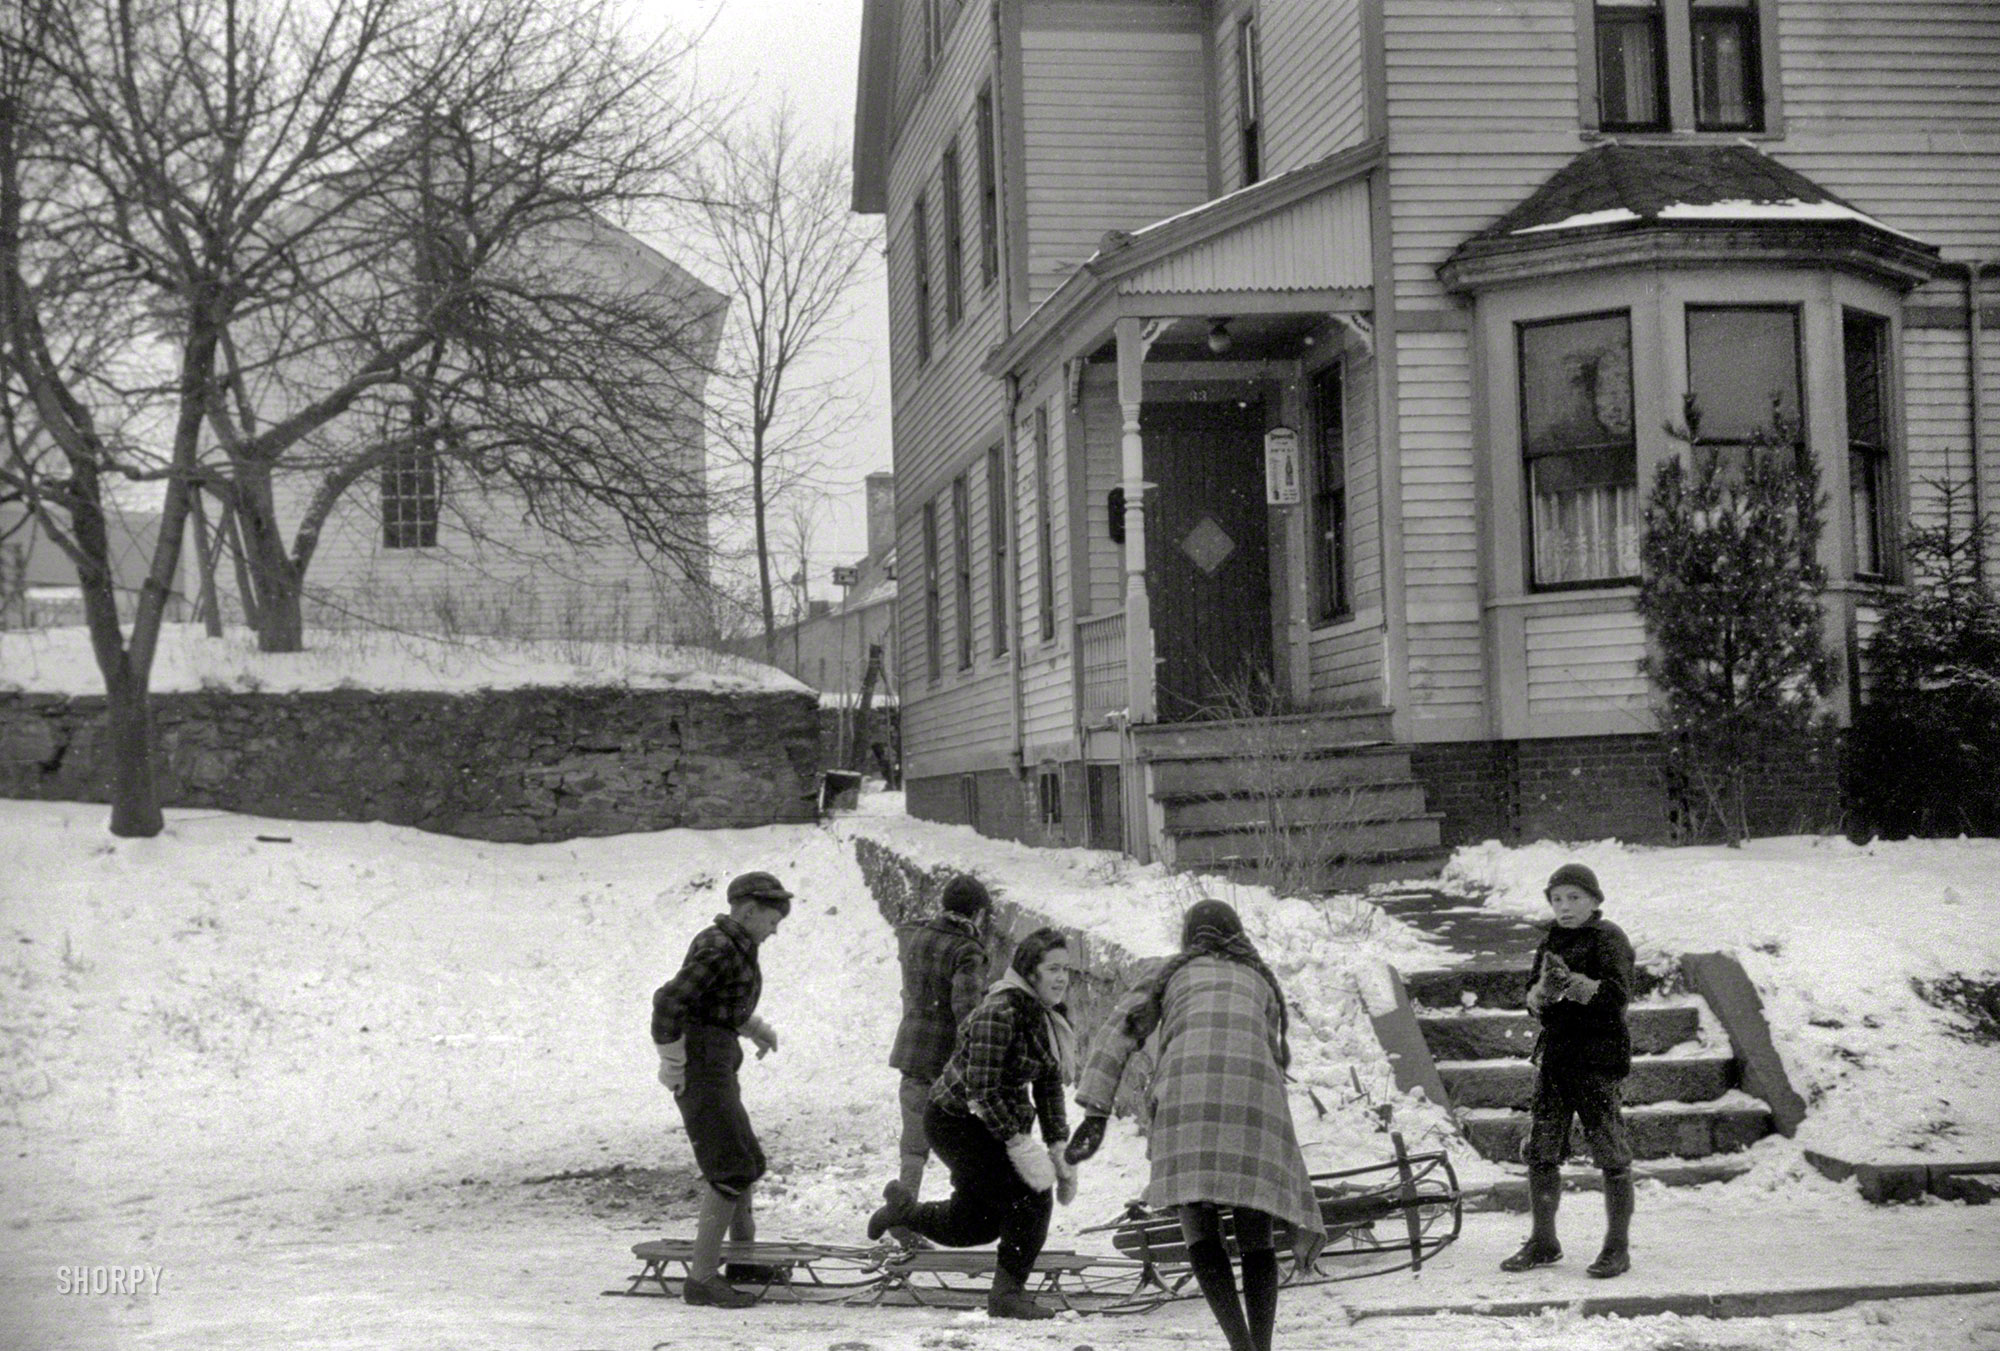 November 1940. "Children sledding, Jewett City, Connecticut." First stop: the frozen flagpole. 35mm nitrate negative by Jack Delano. View full size.